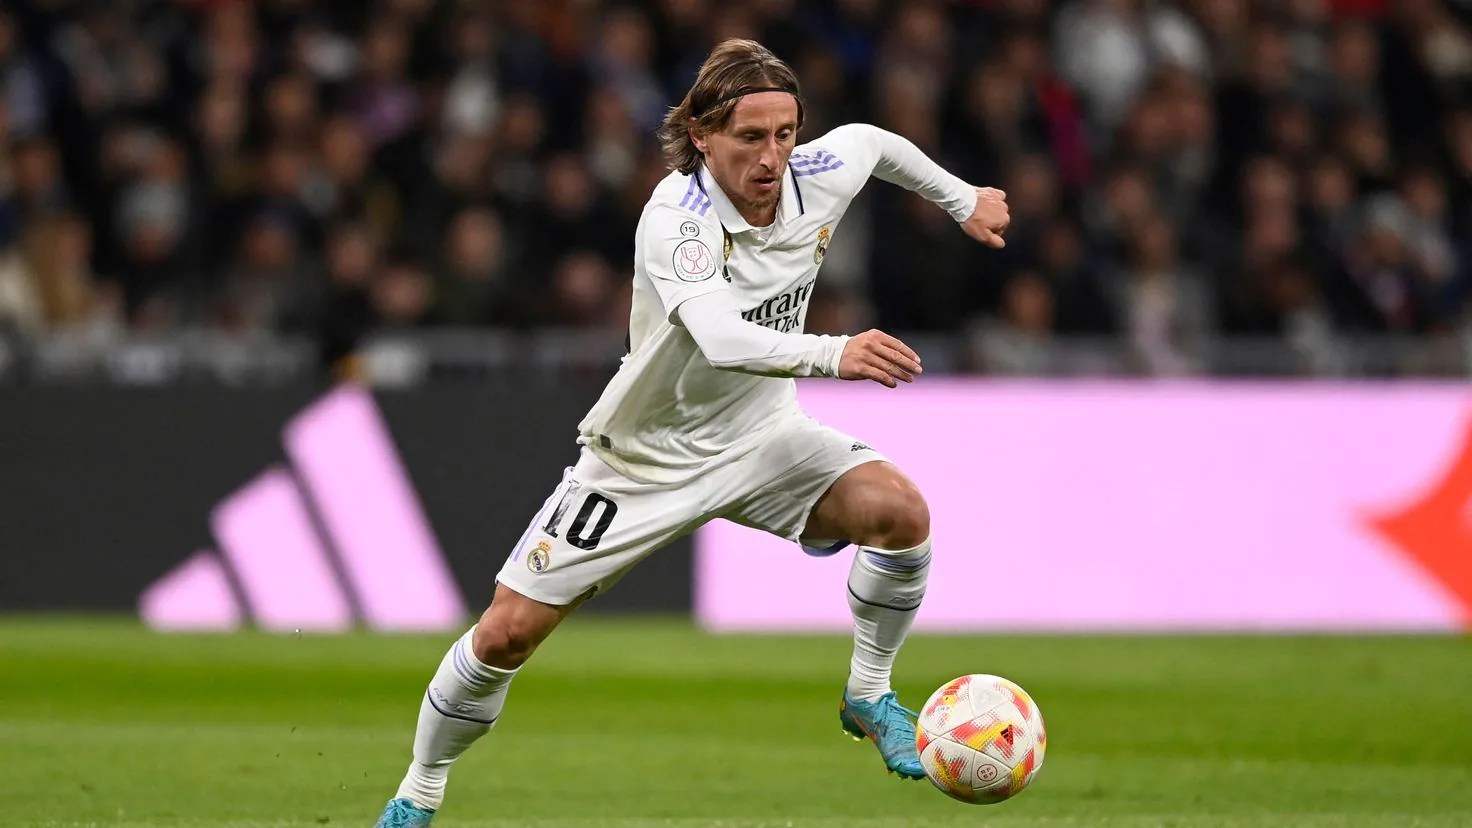 Luka Modric’s performances show that he deserves a new contract at Real